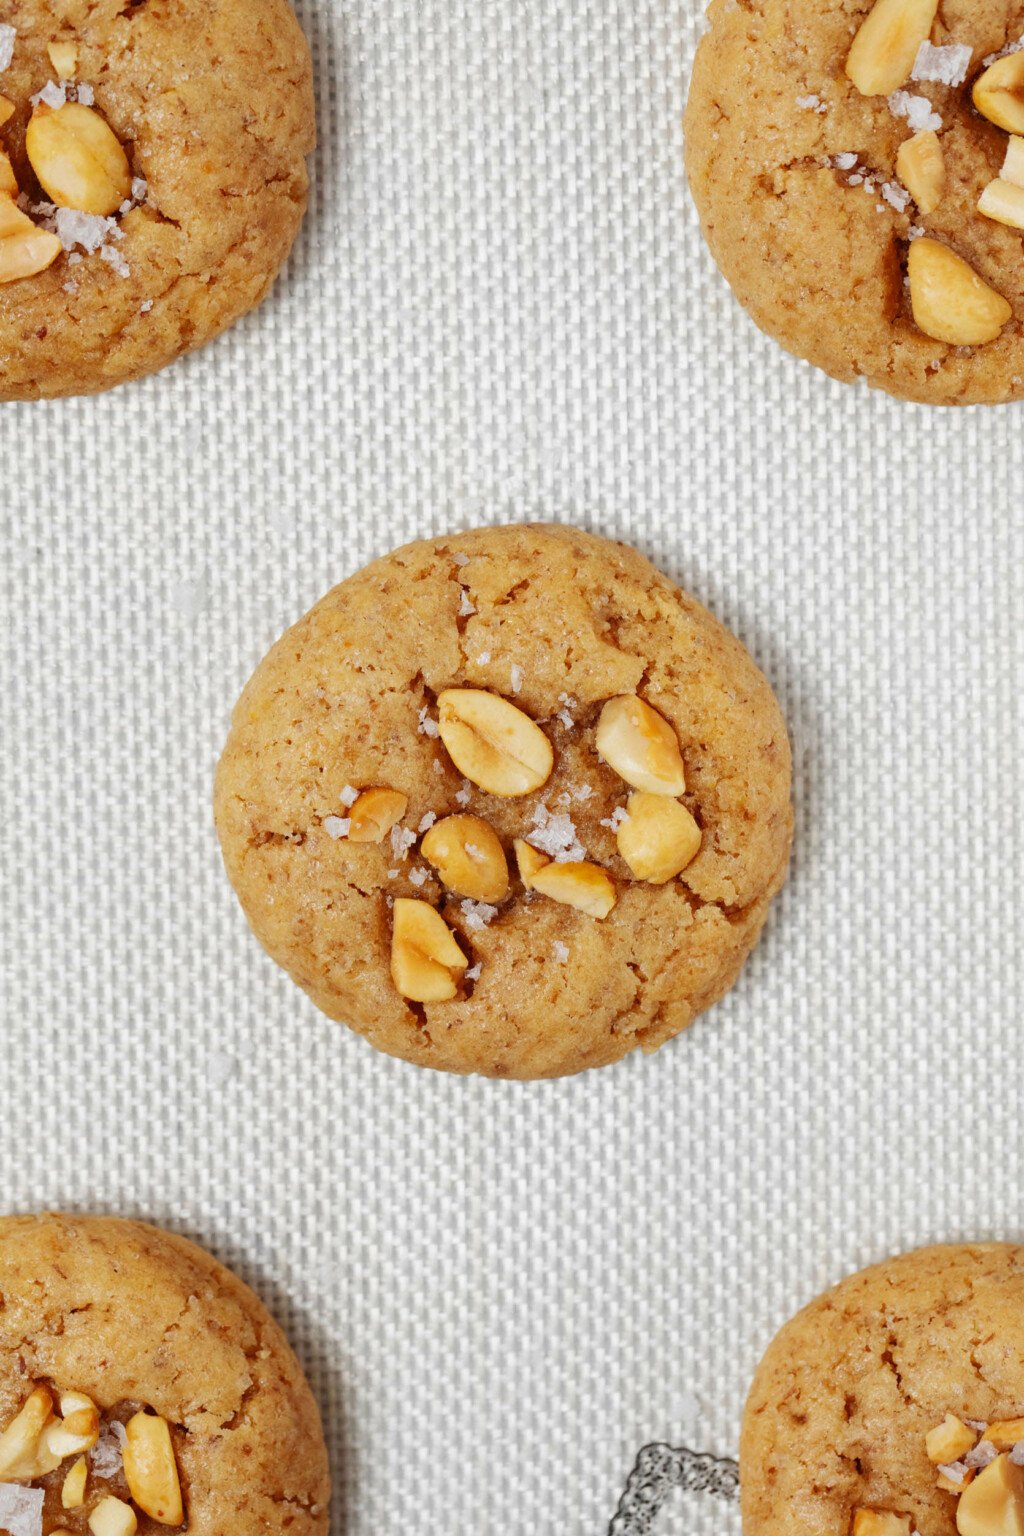 A light-colored, Silpat baking sheet is topped with round, puffy peanut cookies.